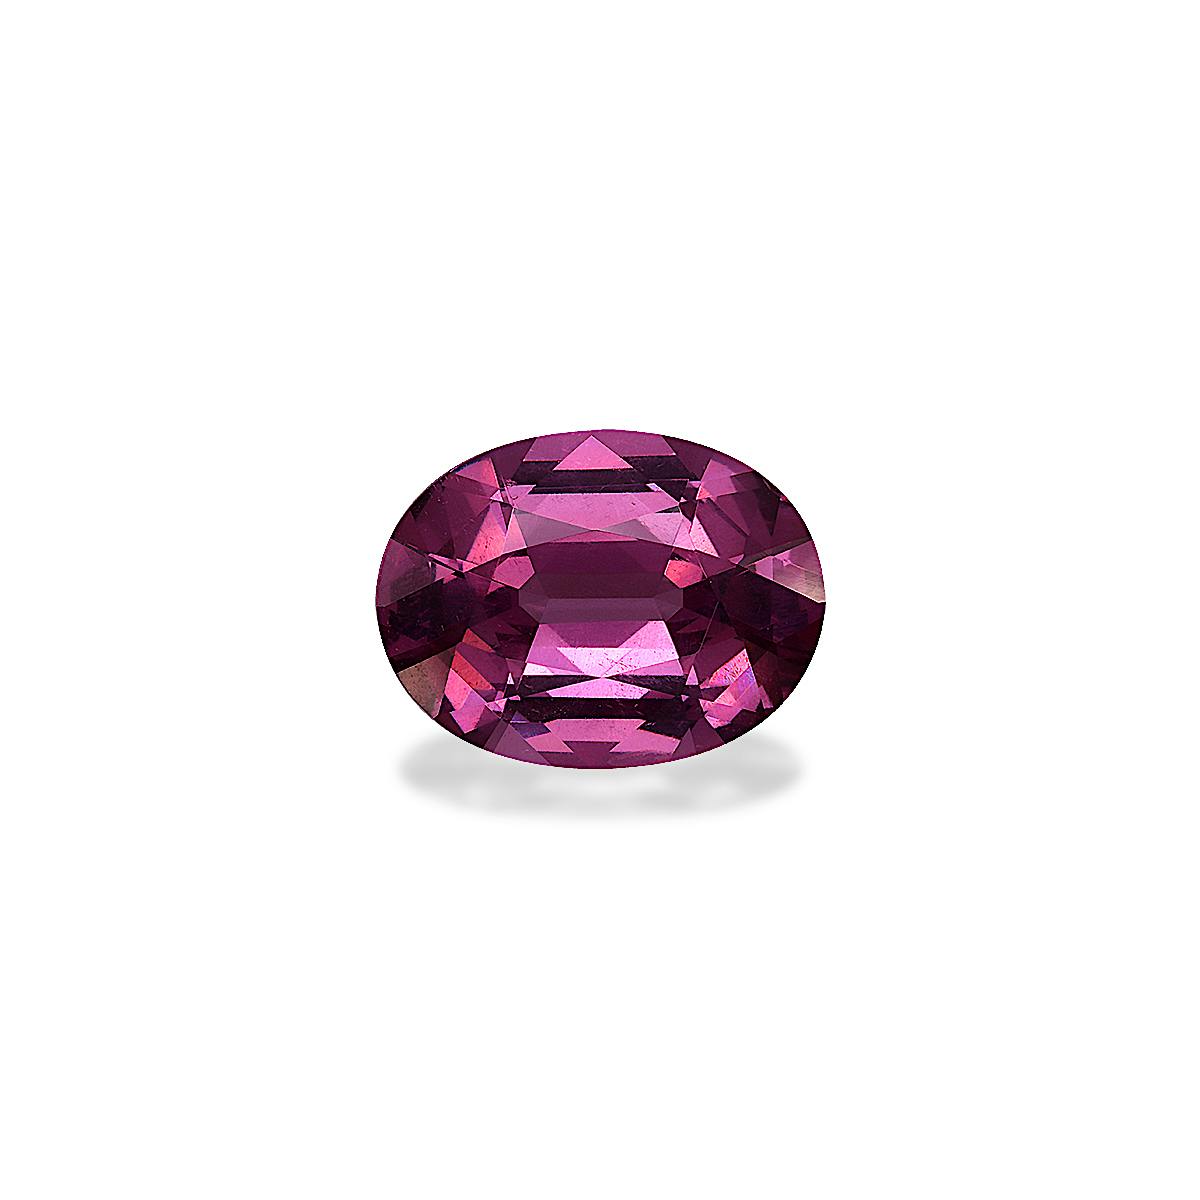 Pink Spinel 4.11ct - Main Image